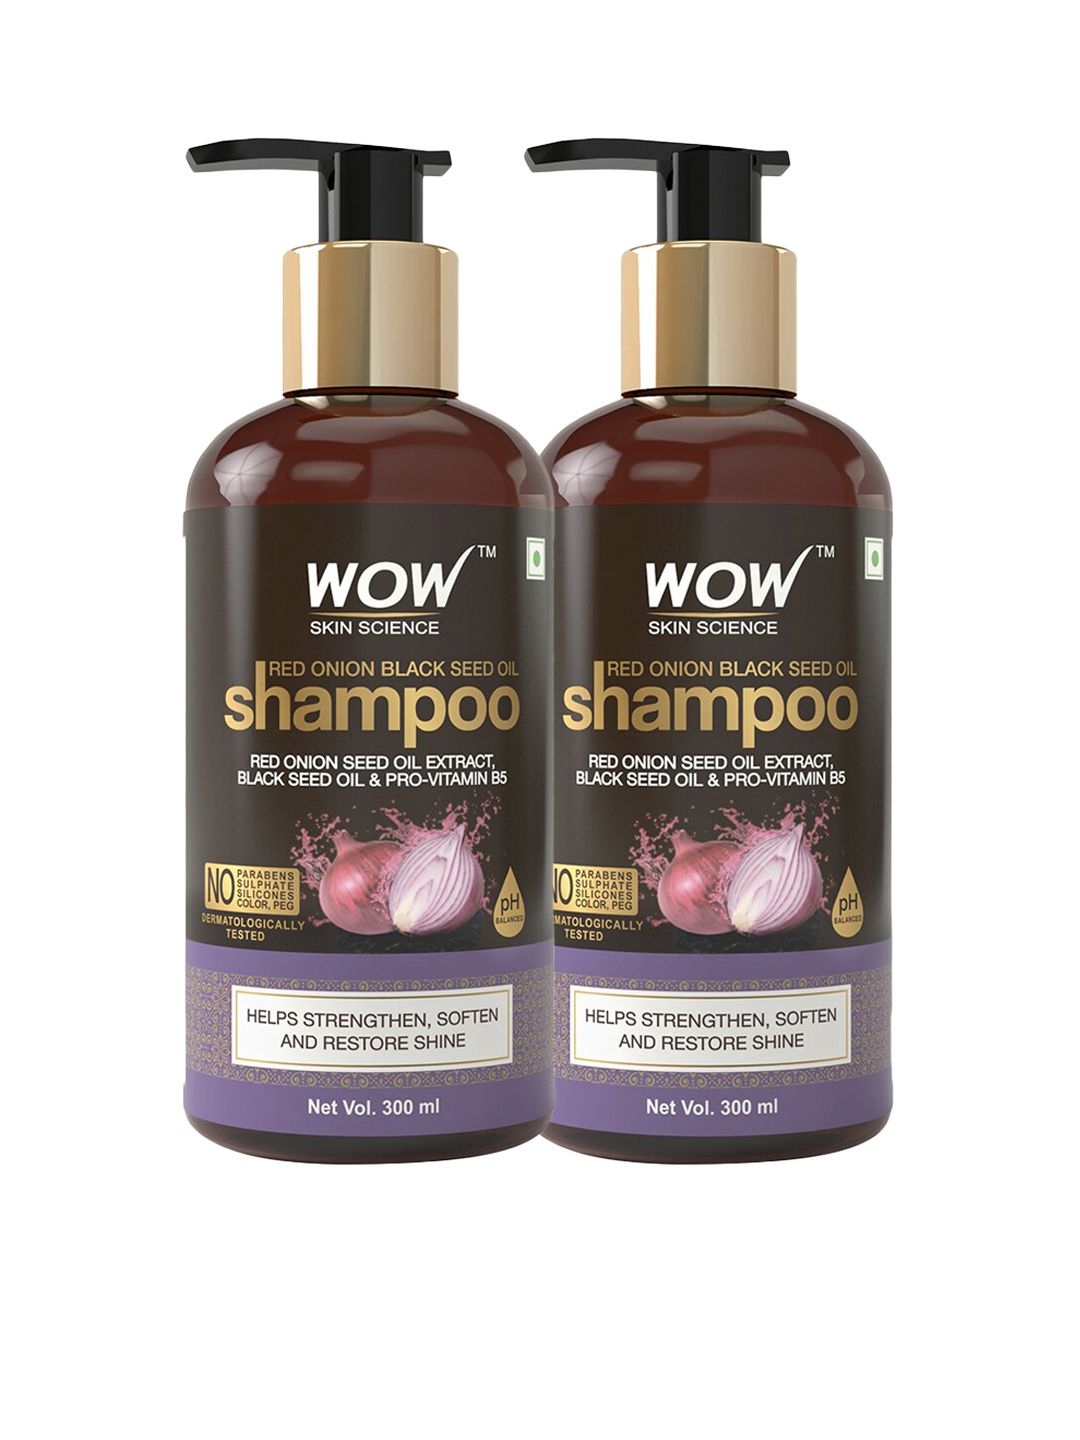 WOW SKIN SCIENCE Set of 2 Onion Black Seed Oil Shampoo Price in India